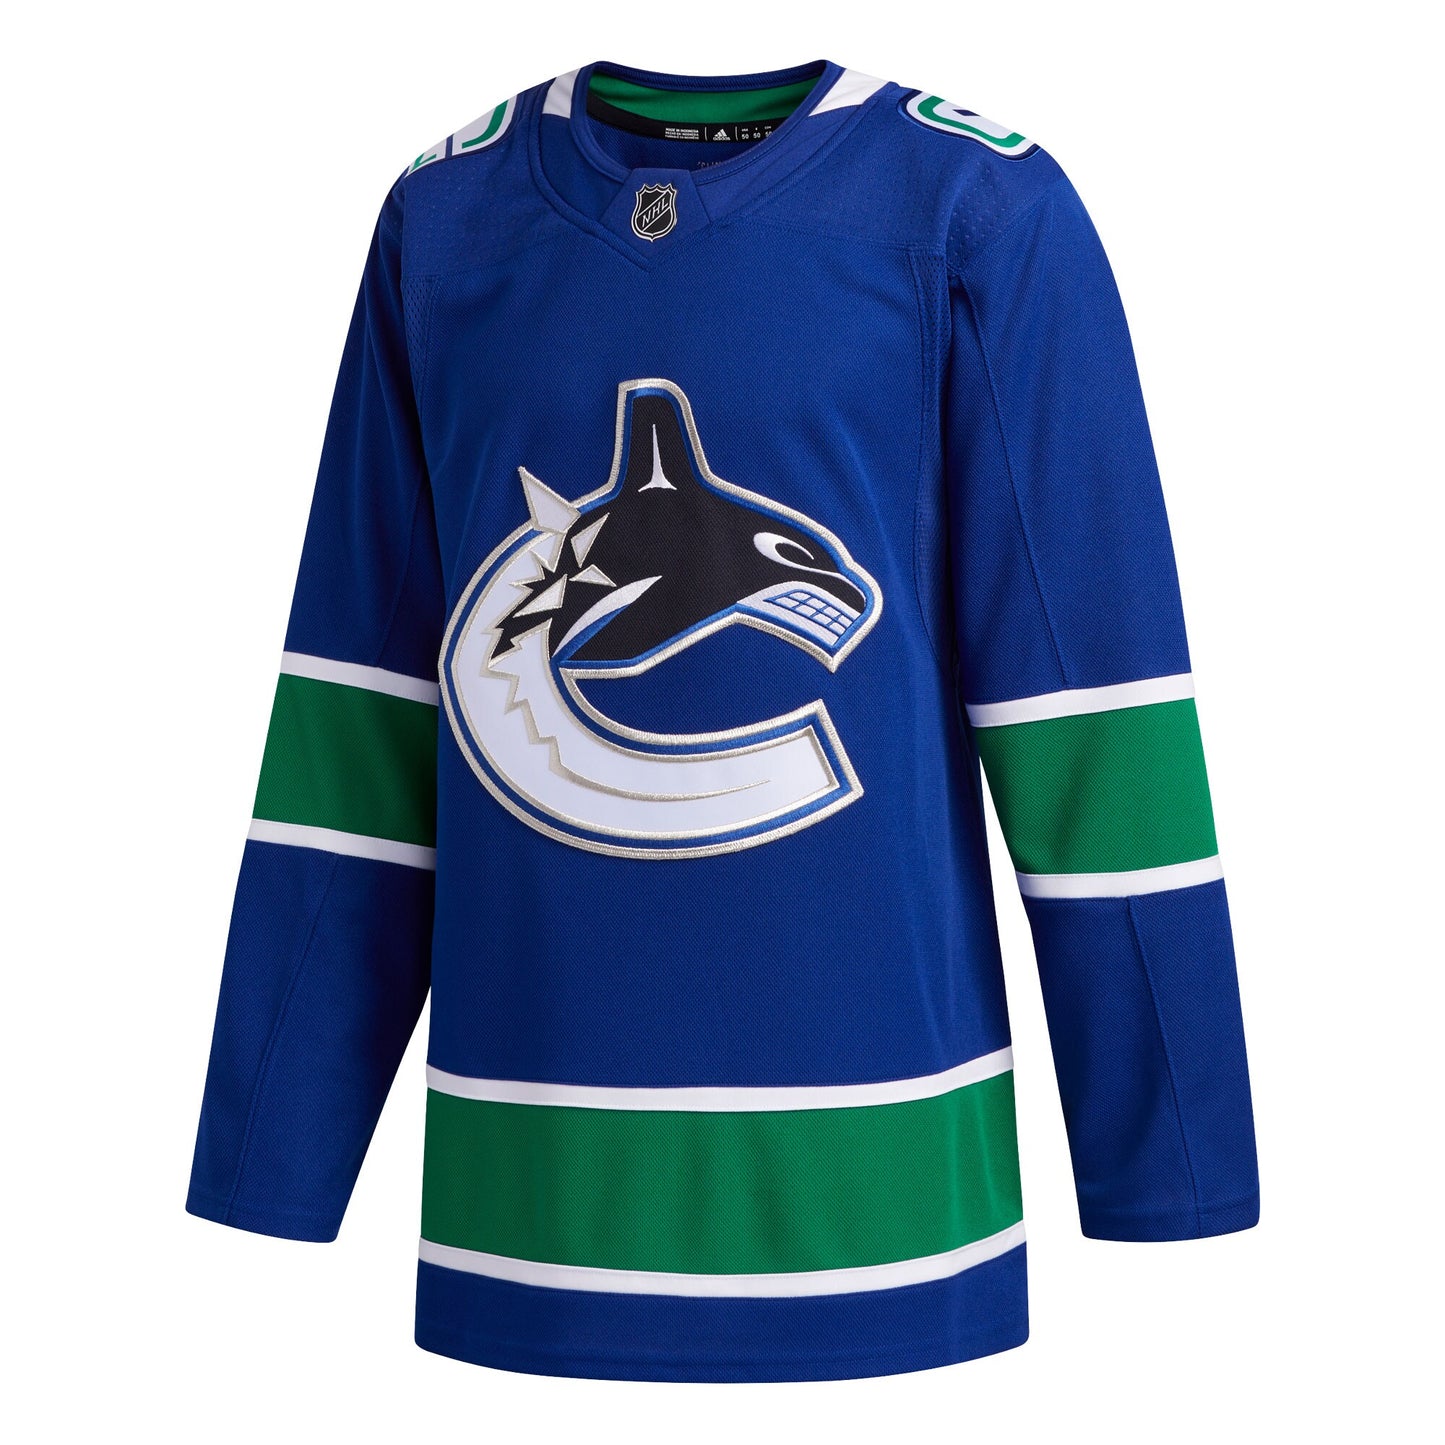 Vancouver Canucks adidas 2019/20 Home Authentic Jersey - Blue